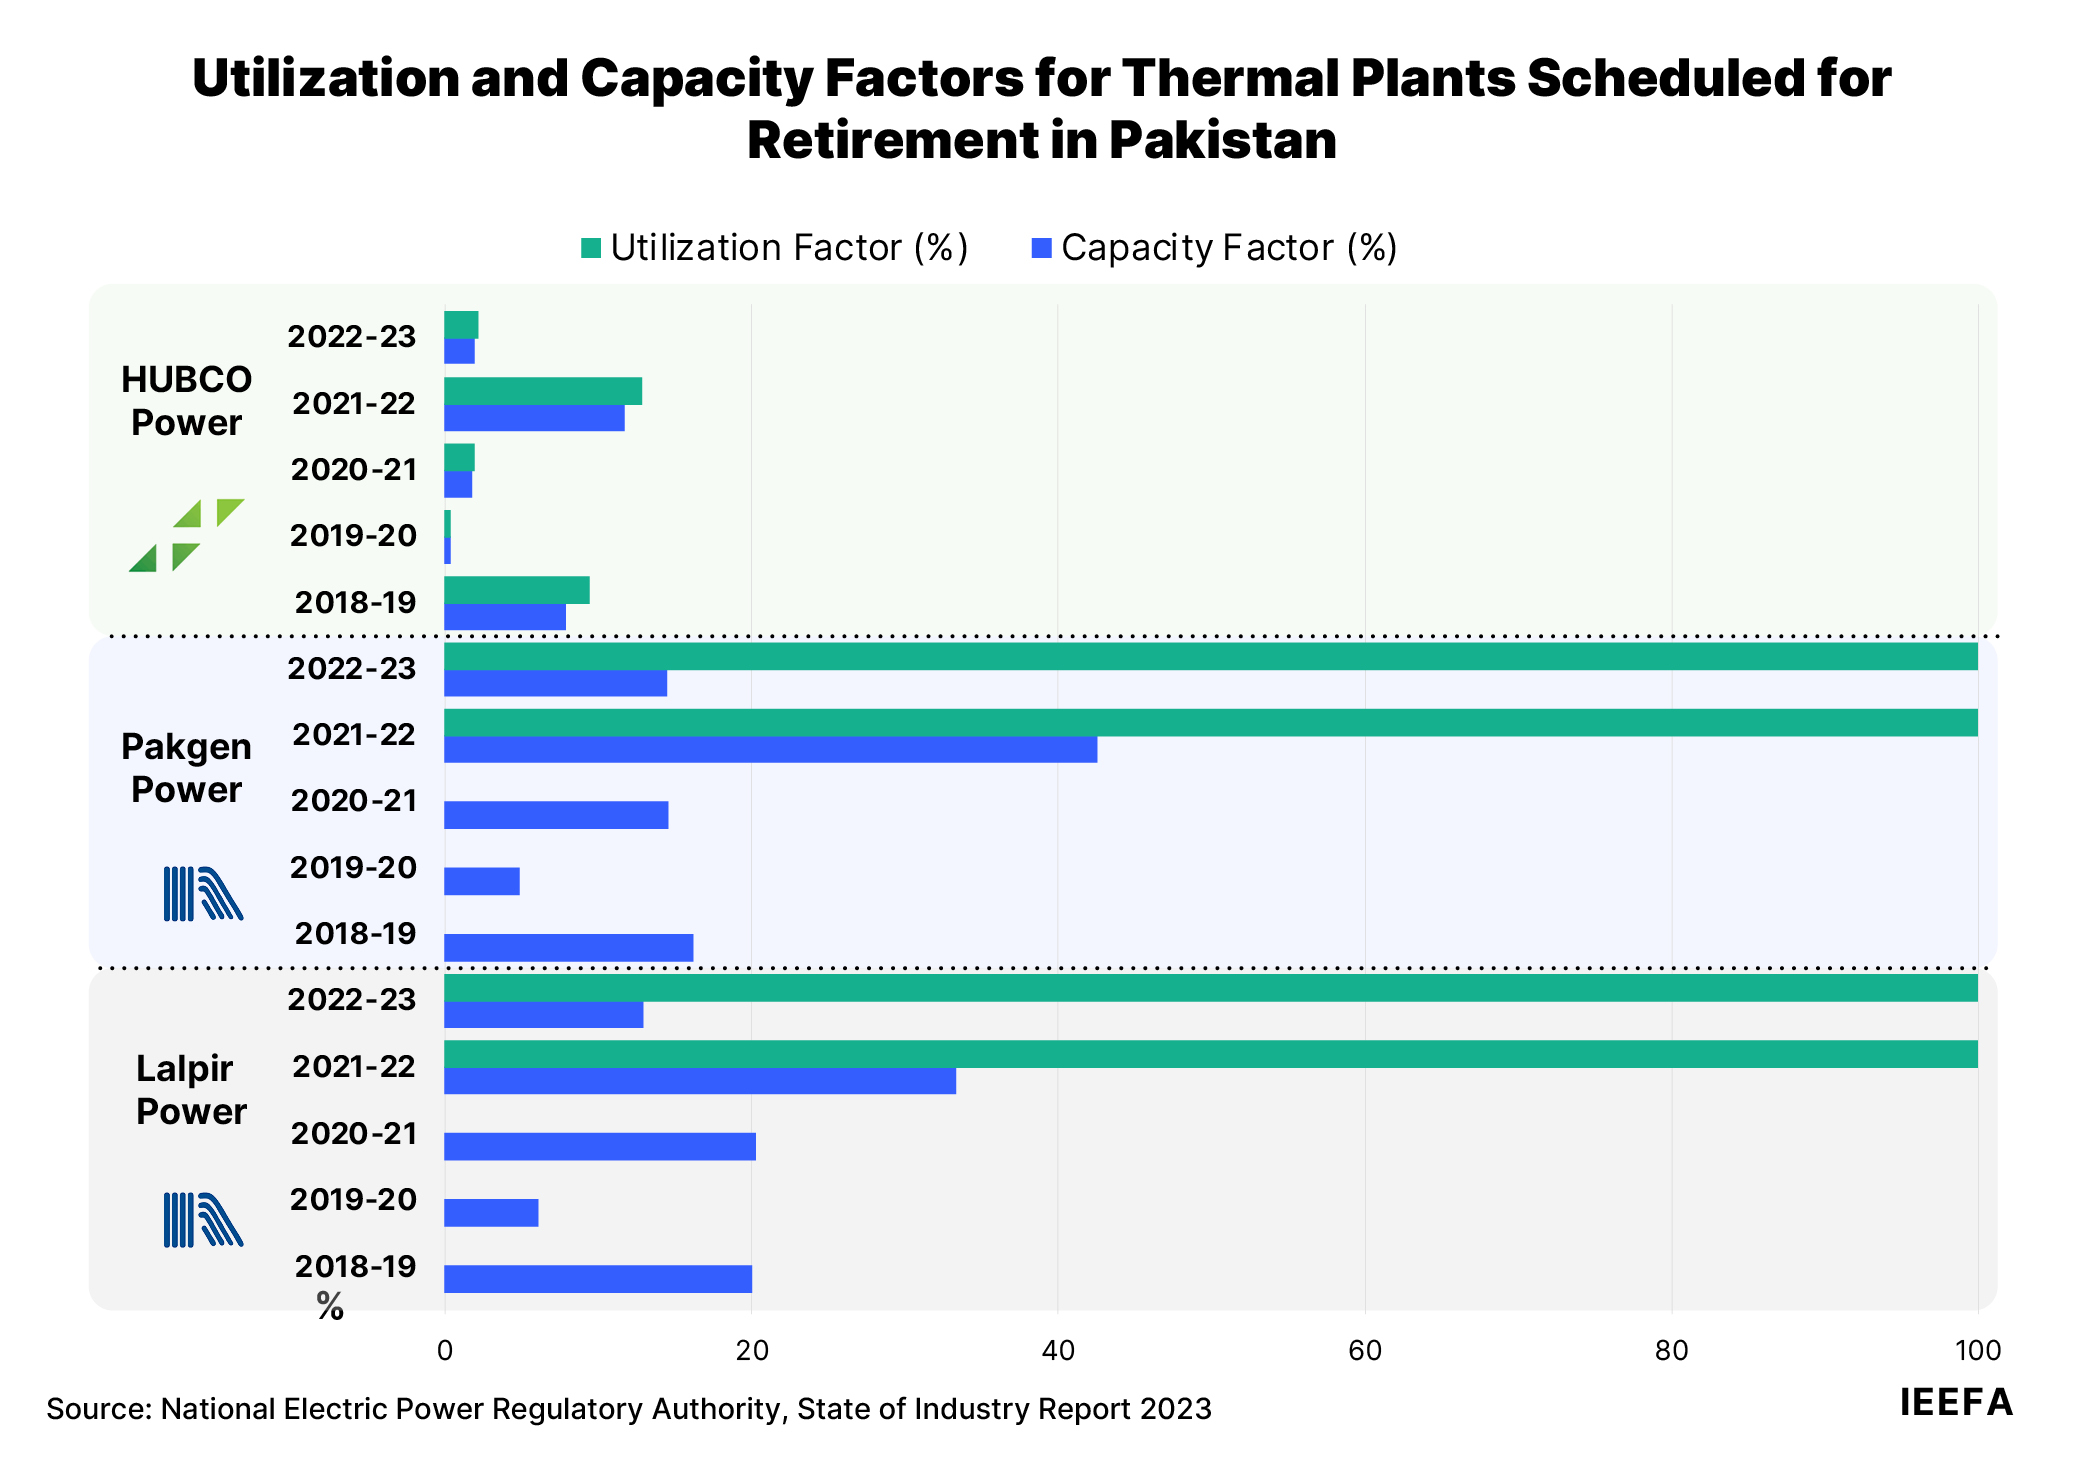 Pakistan utilization and capacity factors for thermal plants for retirement